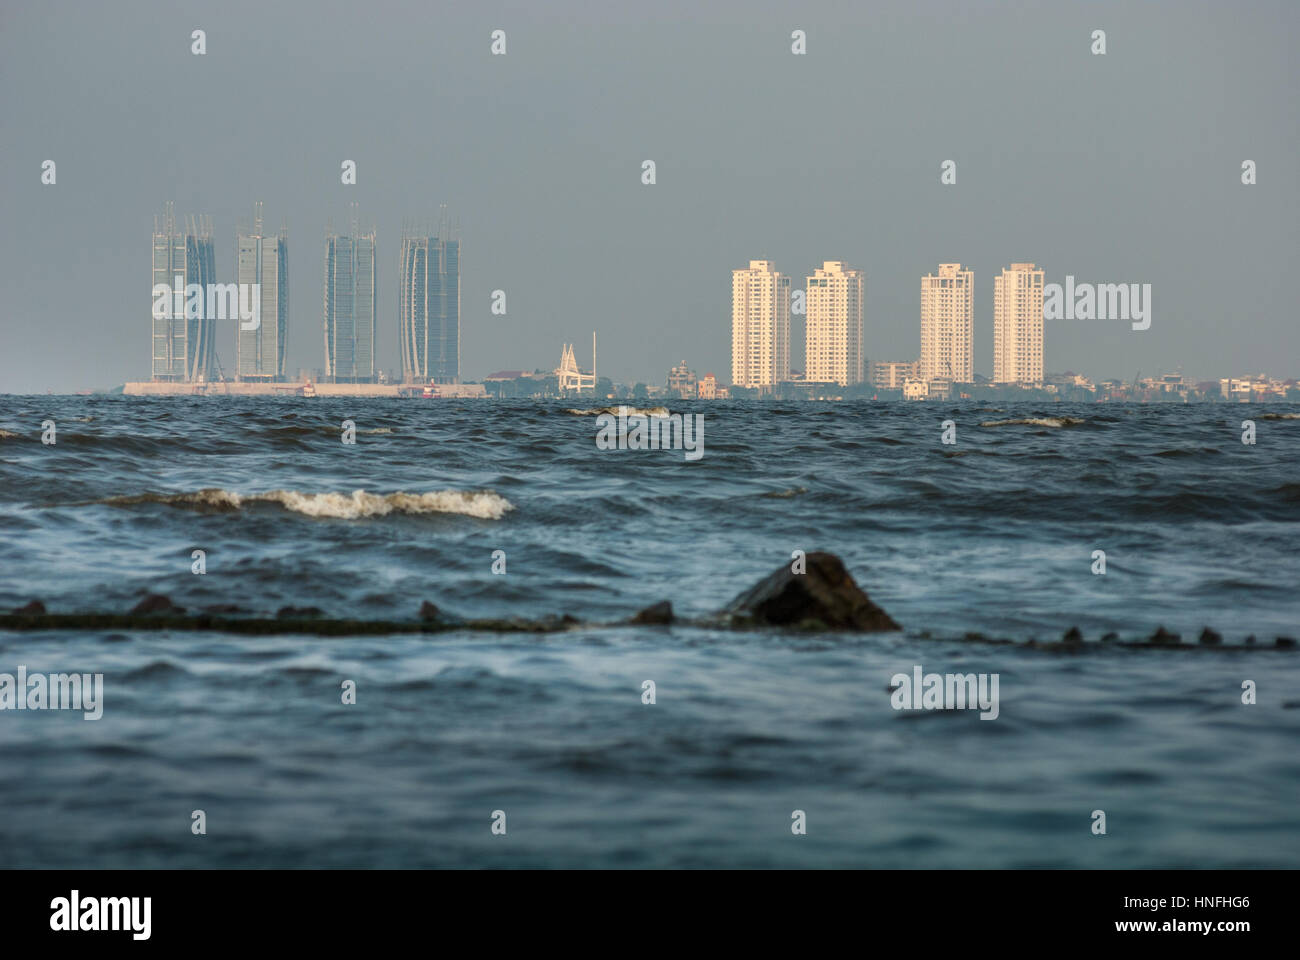 Ruins of man-made structures destroyed by the sea waves in the North Jakarta coastline. Jakarta, Indonesia. Stock Photo